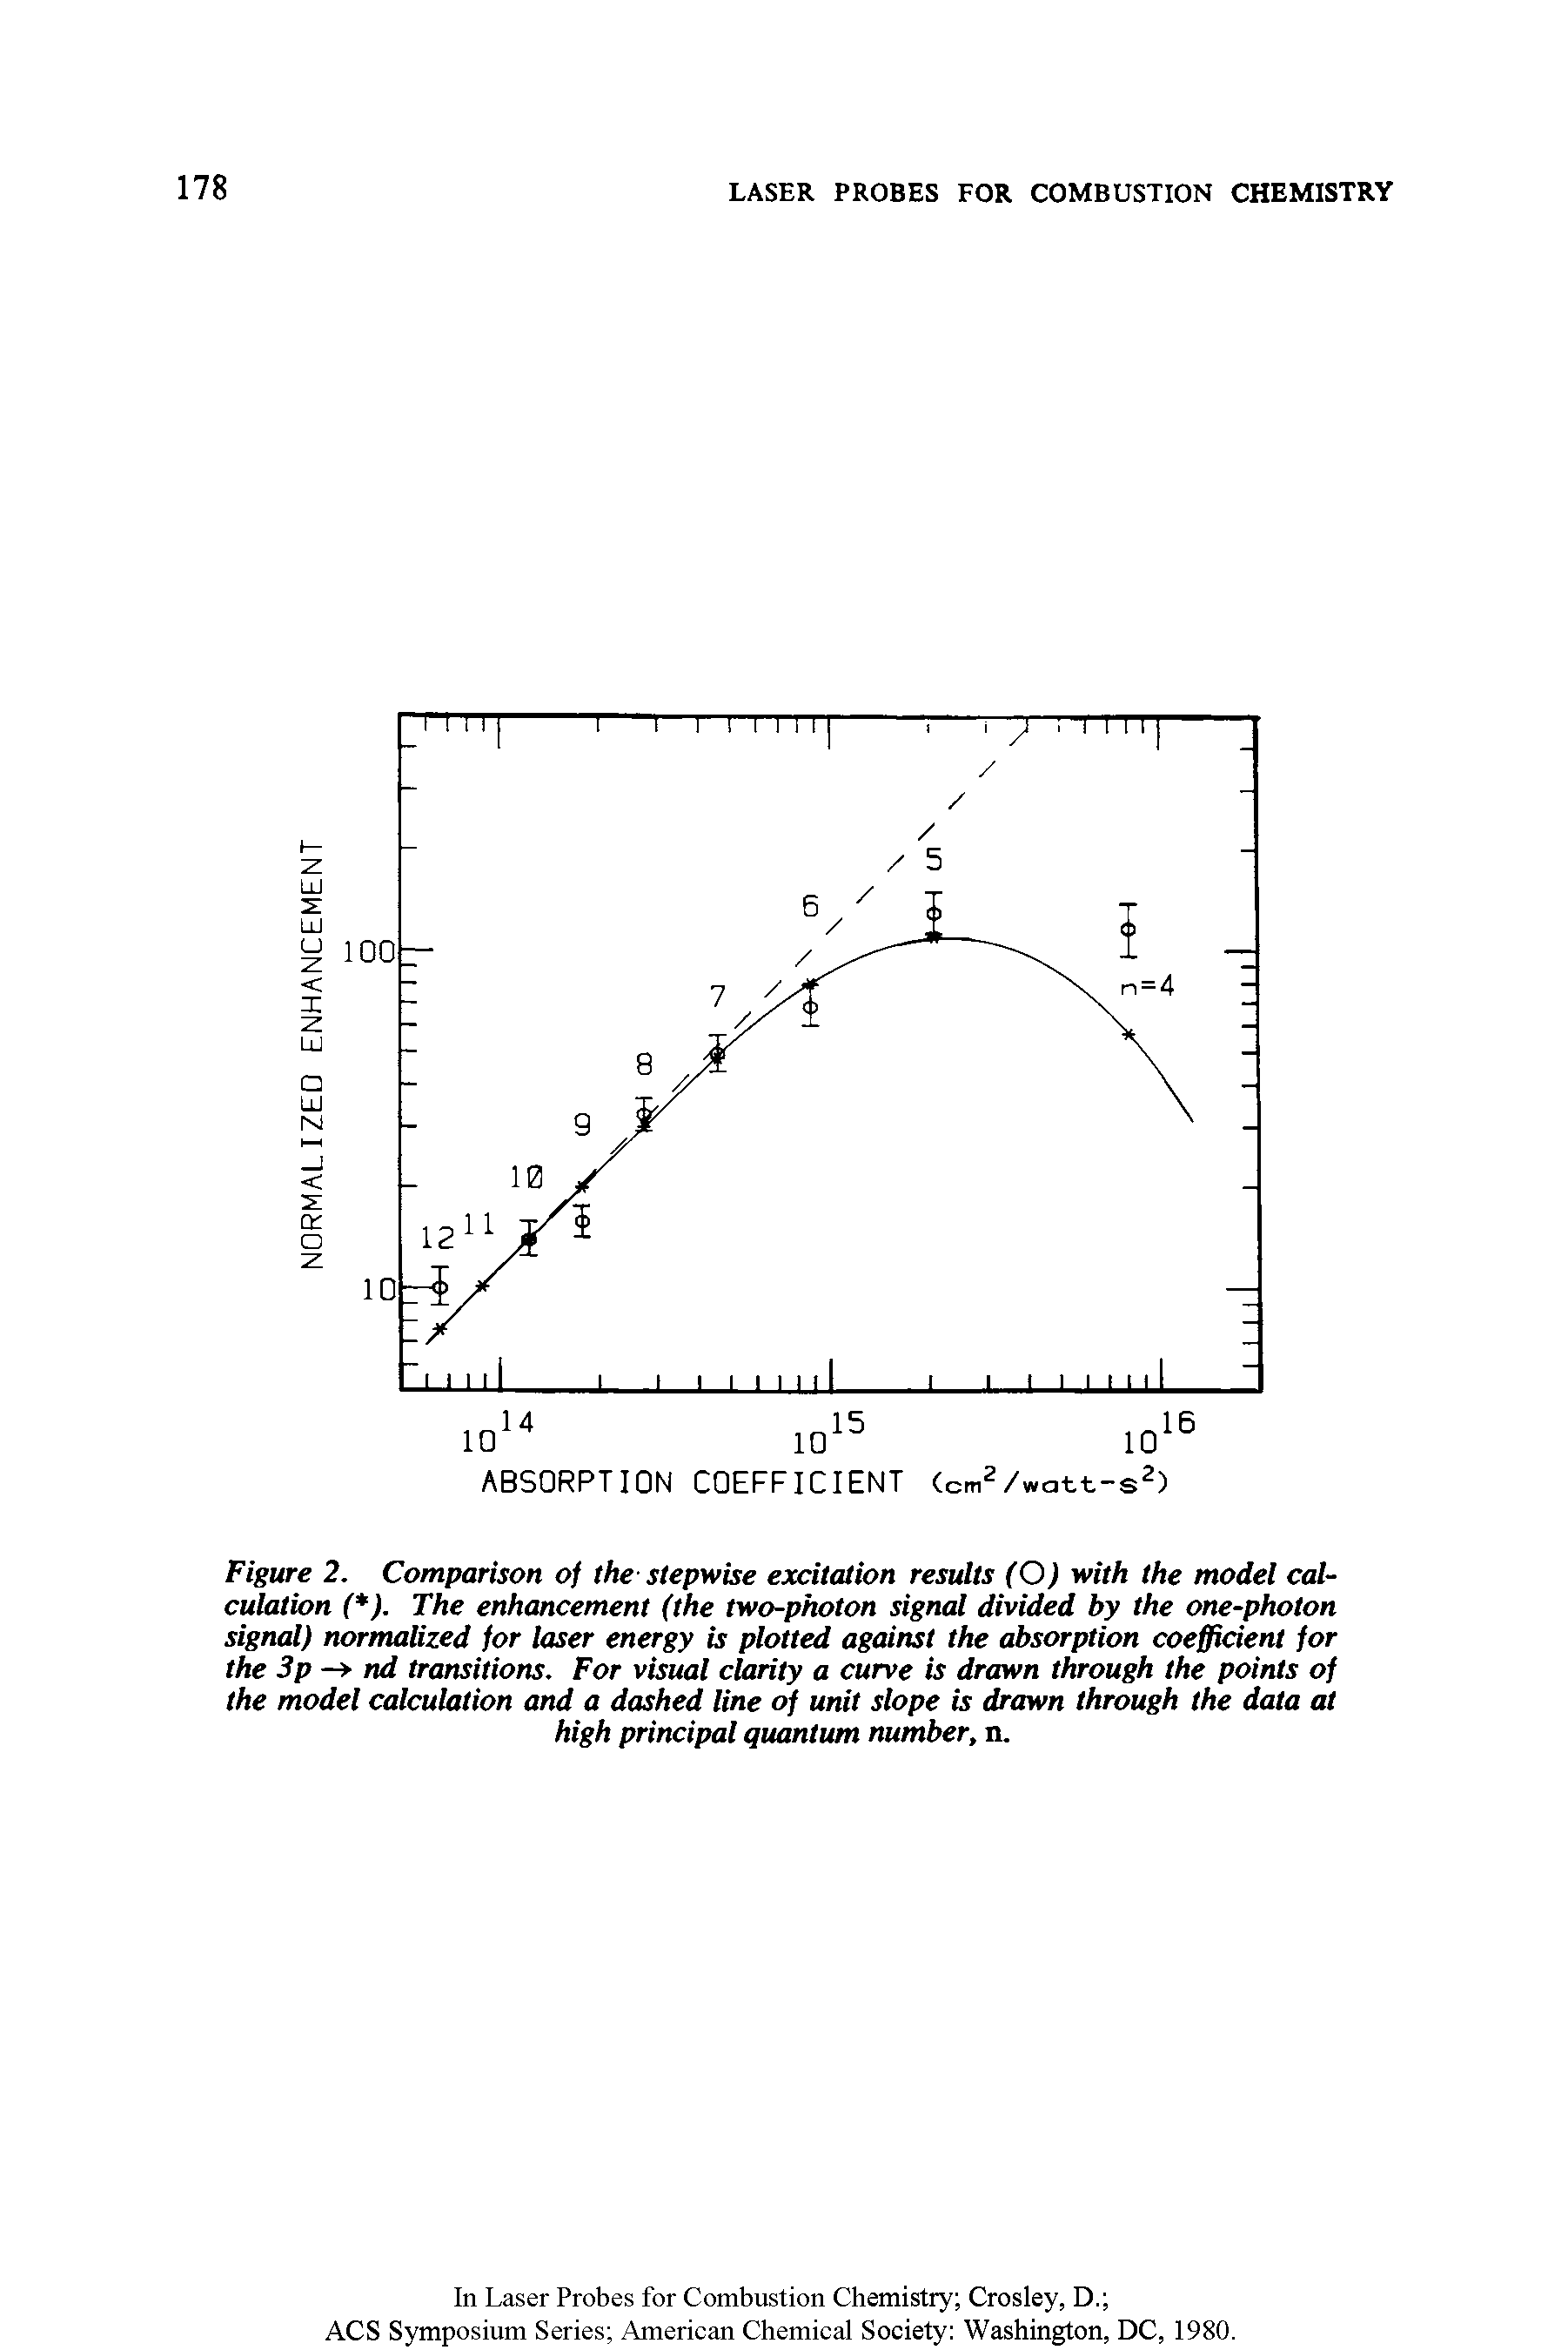 Figure 2. Comparison of the- stepwise excitation results (O) with the model calculation ( ). The enhancement (the two-photon signal divided by the one-photon signal) normalized for laser energy is plotted against the absorption coefficient for the 3p -> nd transitions. For visual clarity a curve is drawn through the points of the model calculation and a dashed line of unit slope is drawn through the data at high principal quantum number, n.